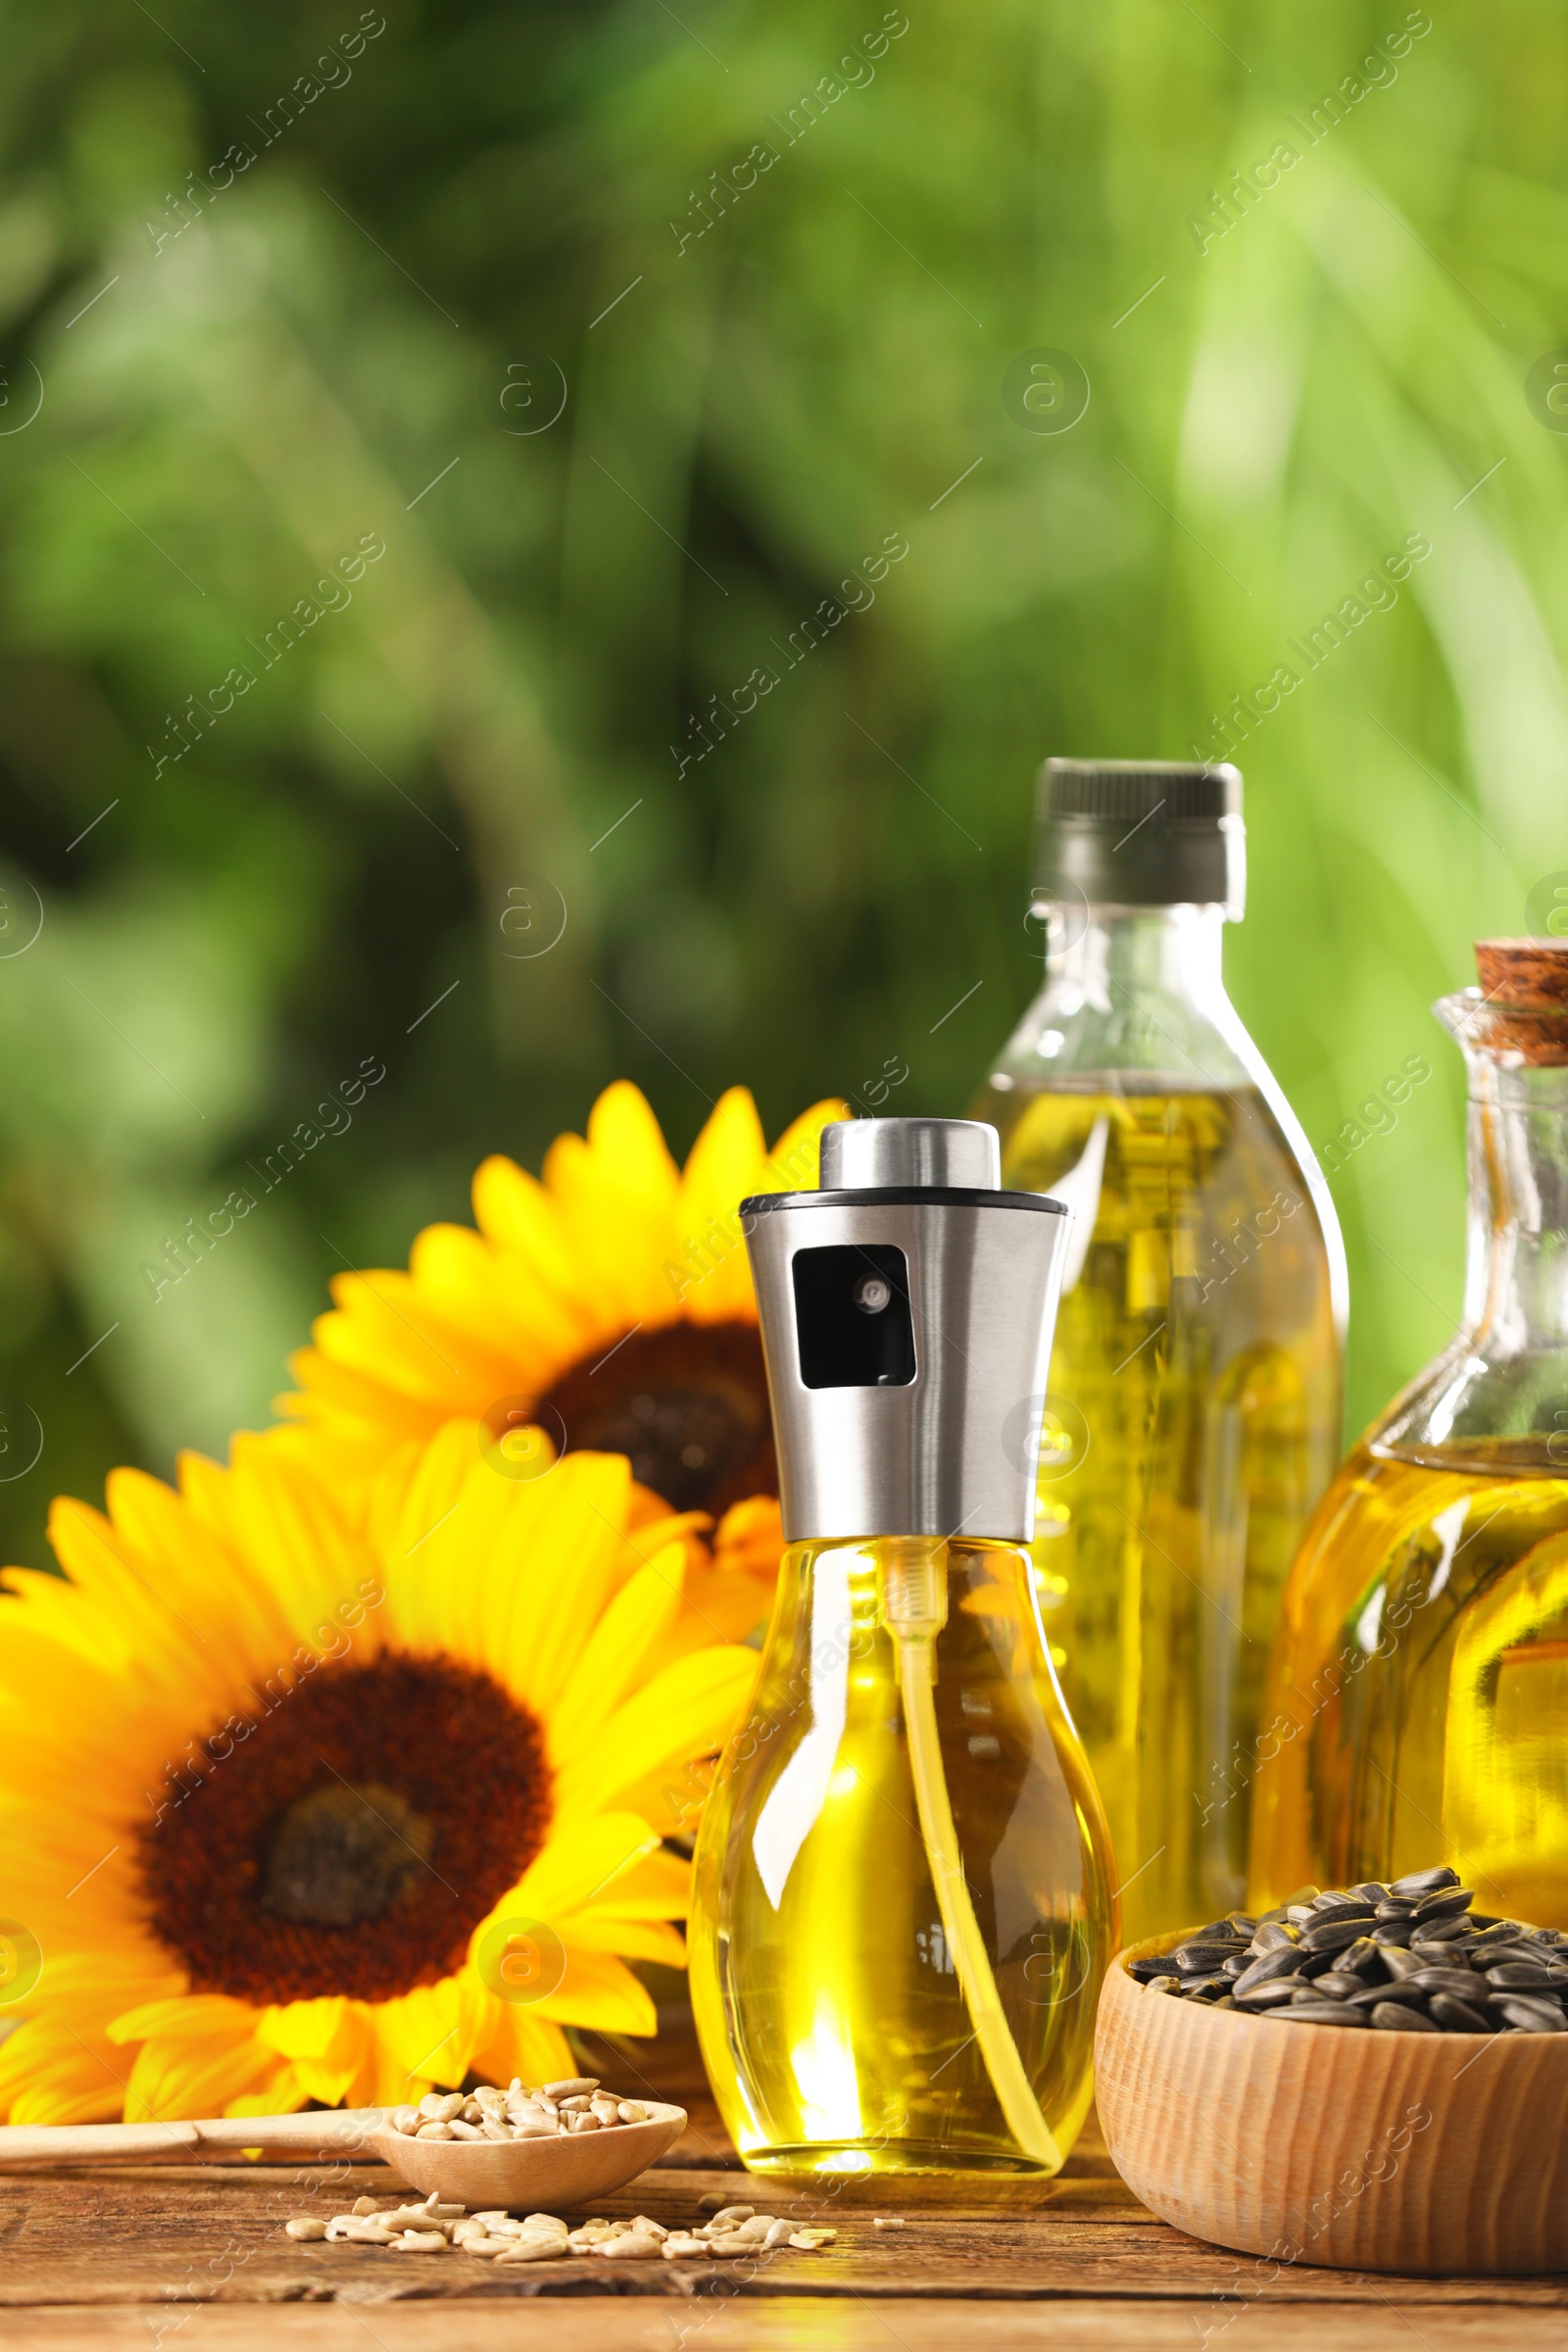 Photo of Many different bottles with cooking oil, sunflower seeds and flowers on wooden table against blurred background